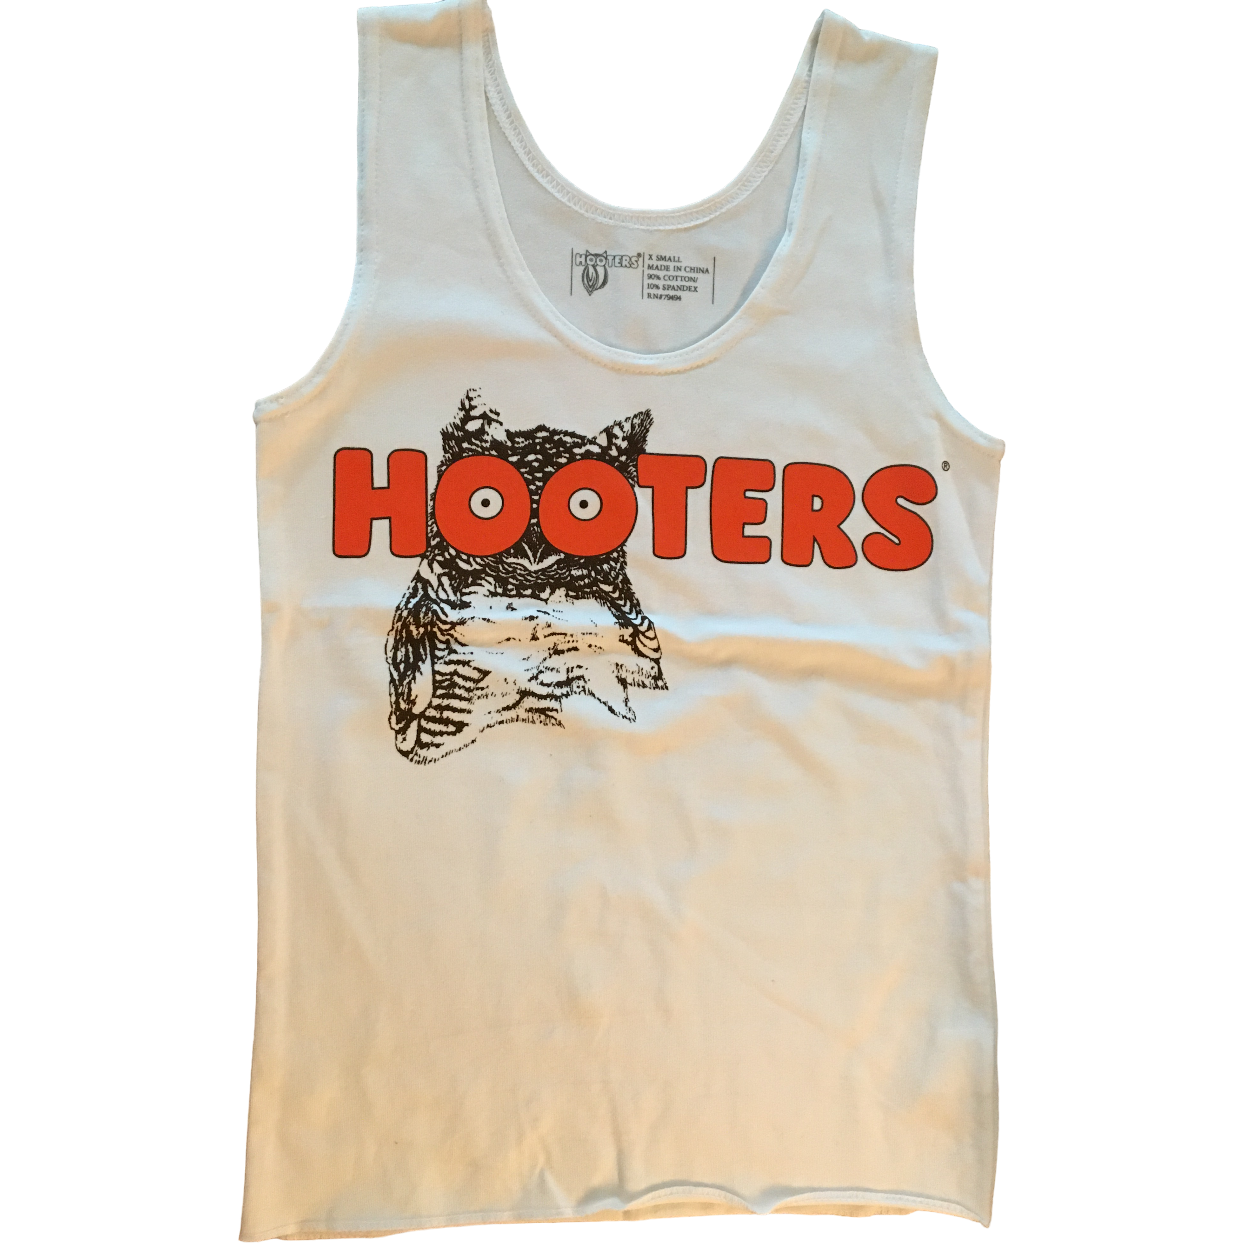 Hooters Women's Costume Spandex White Tank Top